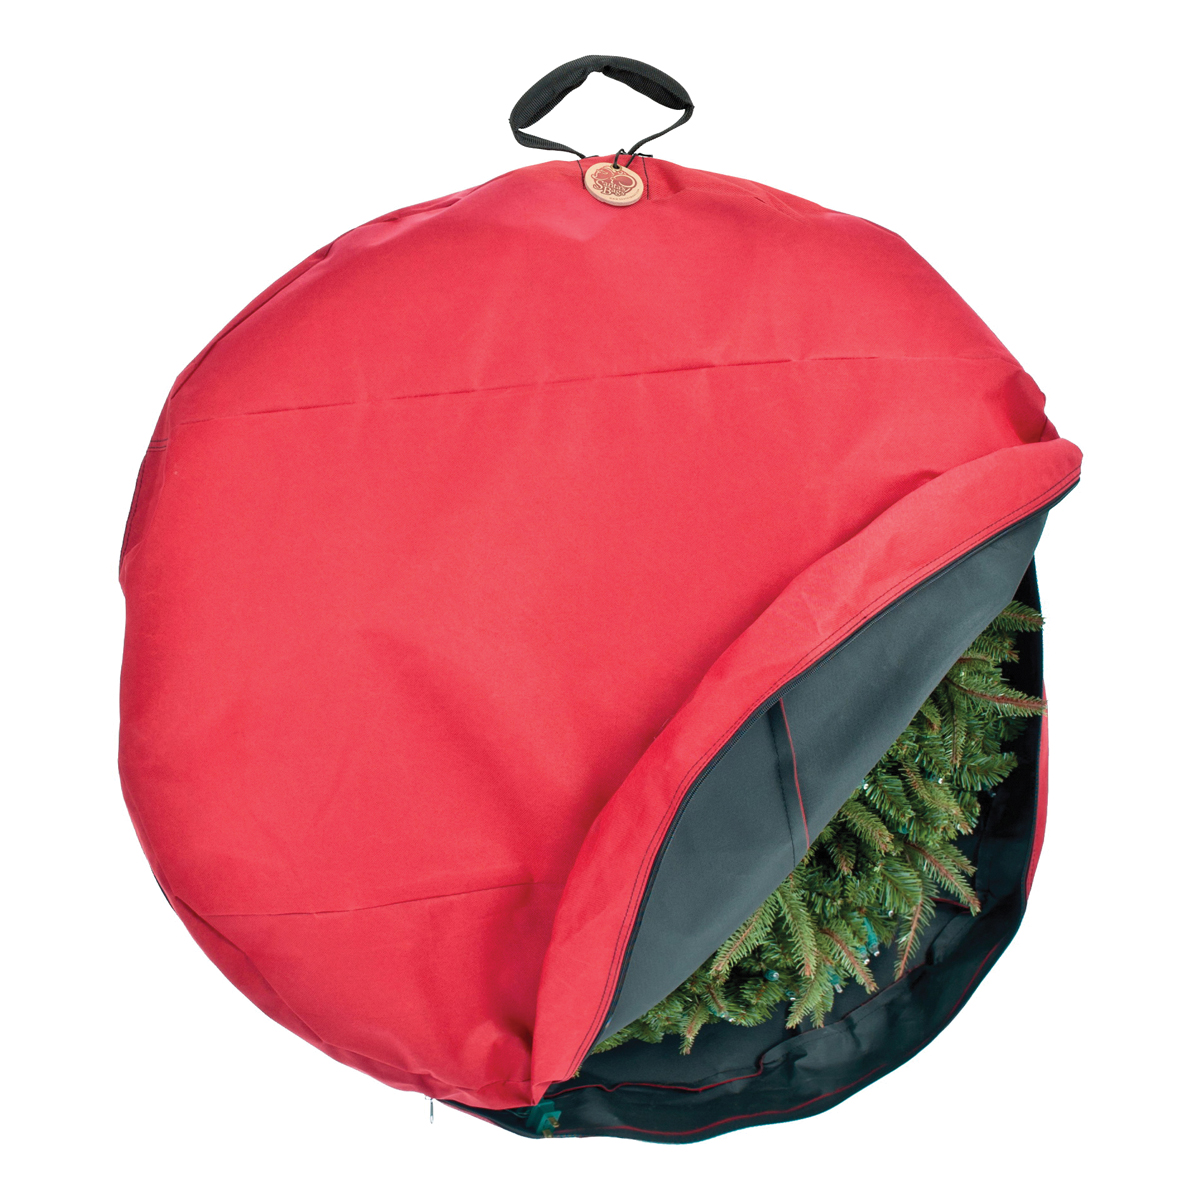 Treekeeper SB-10154 Wreath Storage Cover, 30 in, 30 in Capacity, Polyester, Red - 1